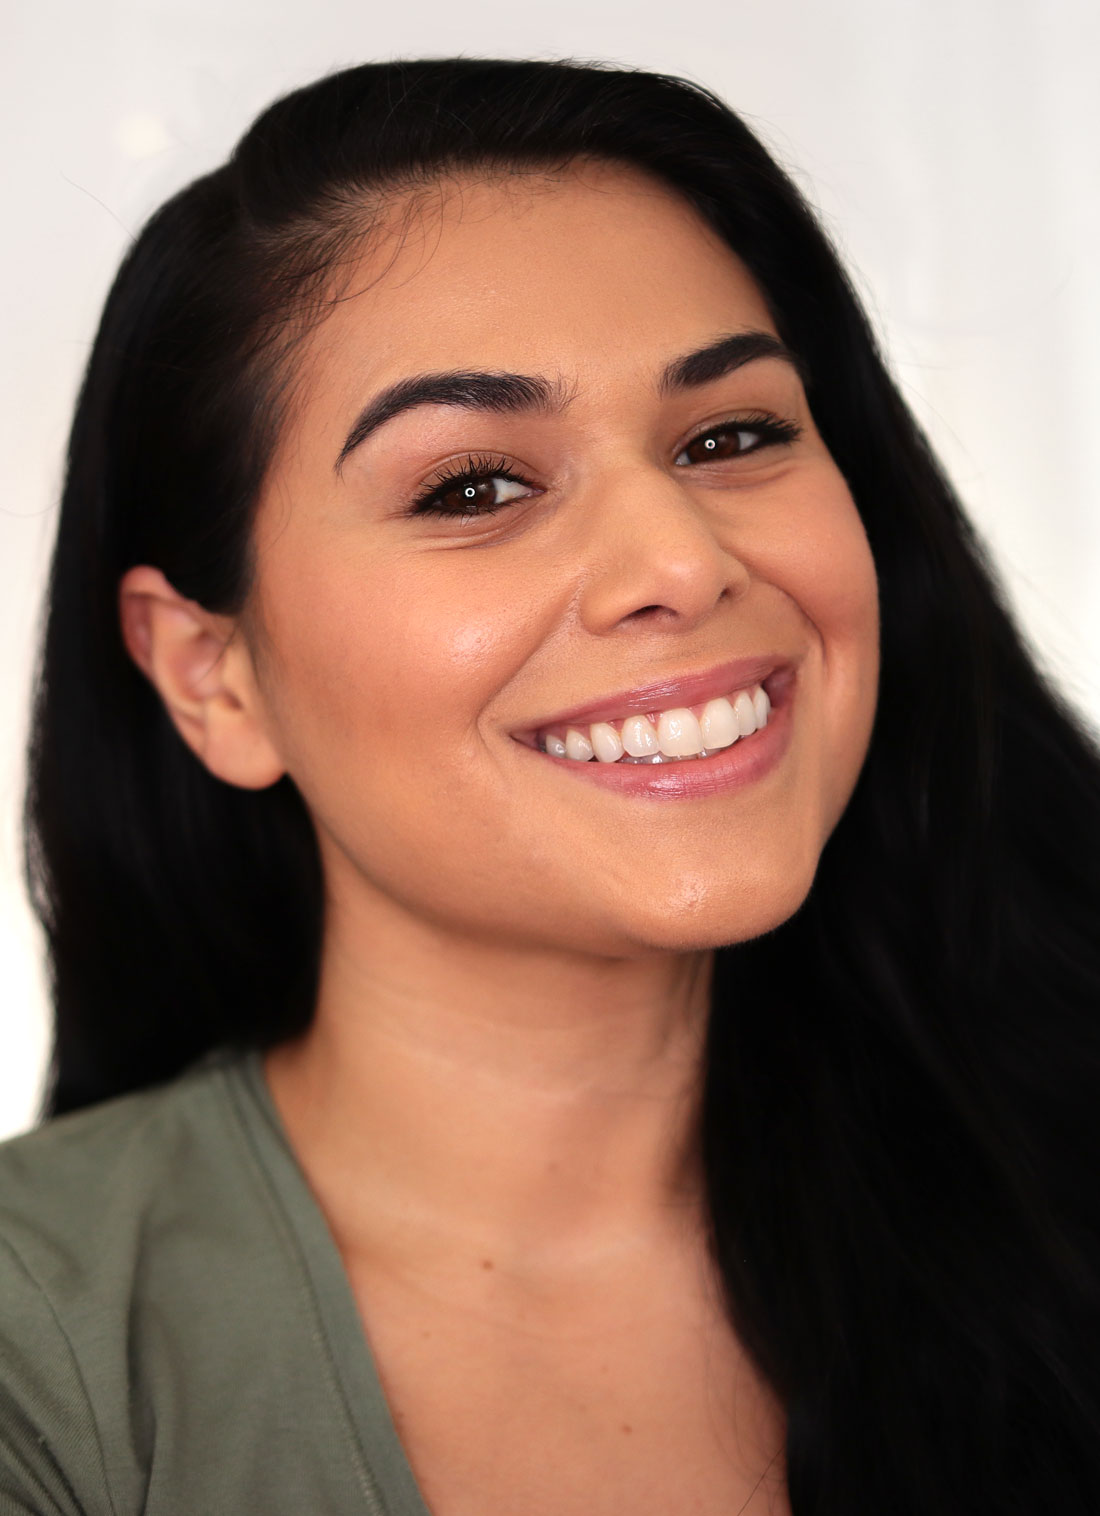 Miranda smiling to camera wearing a fresh faced makeup look. | The Drugstore Makeup for 